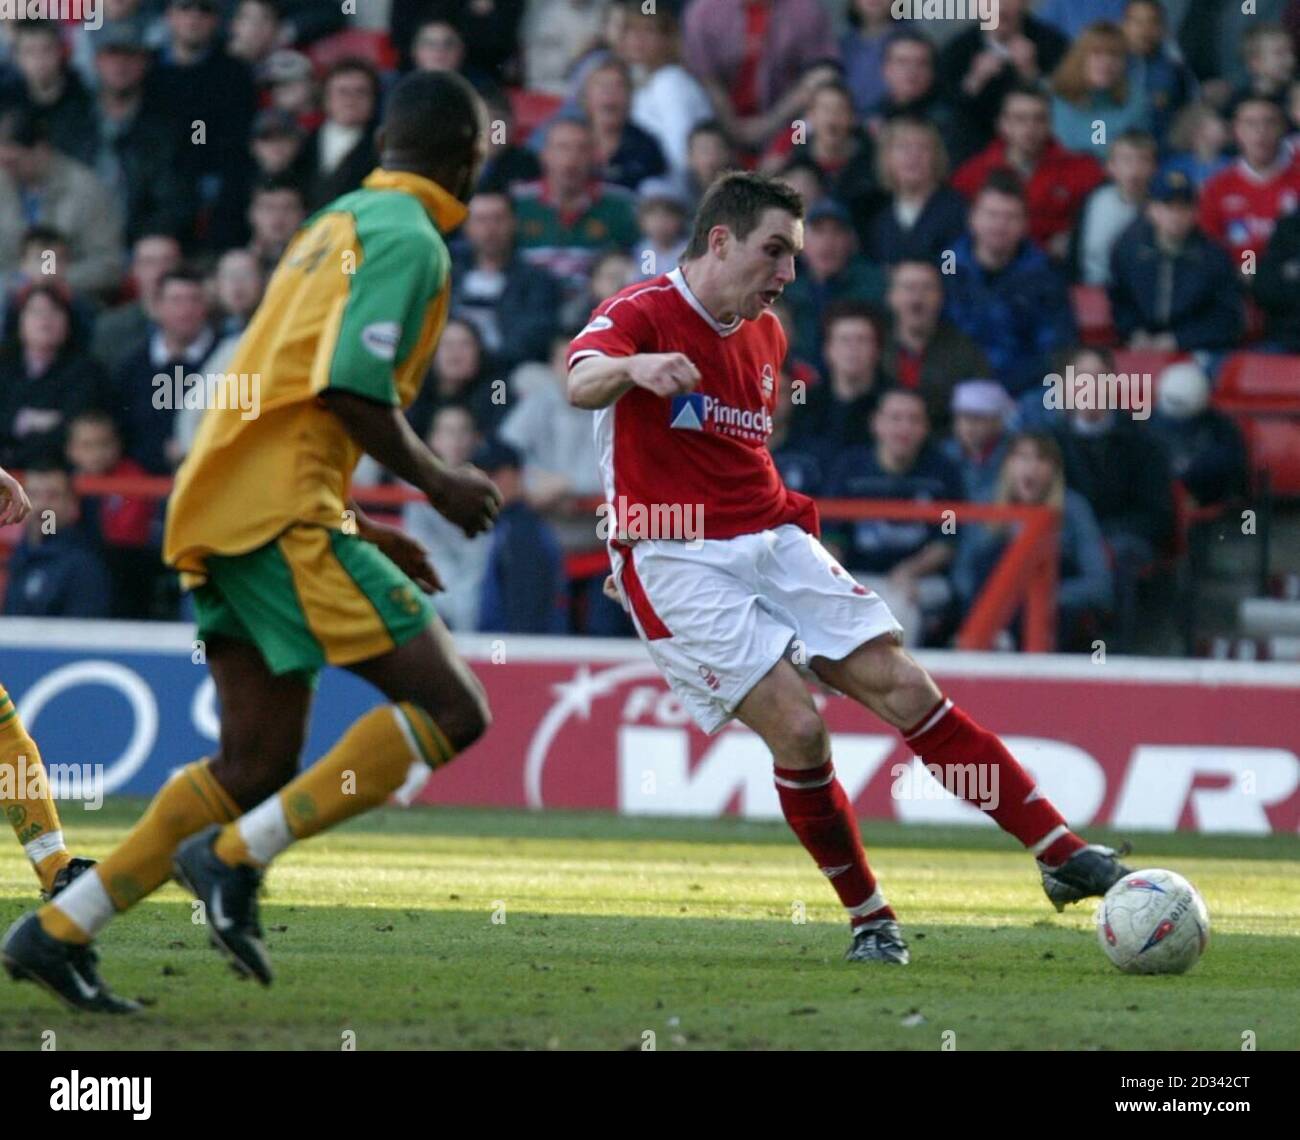 Nottingham Forest's Jim Brennan scores his team's fourth goal against Norwich City during their Nationwide Division One match at Forest's City ground. Final score 4-0.   THIS PICTURE CAN ONLY BE USED WITHIN THE CONTEXT OF AN EDITORIAL FEATURE. NO UNOFFICIAL CLUB WEBSITE USE. Stock Photo